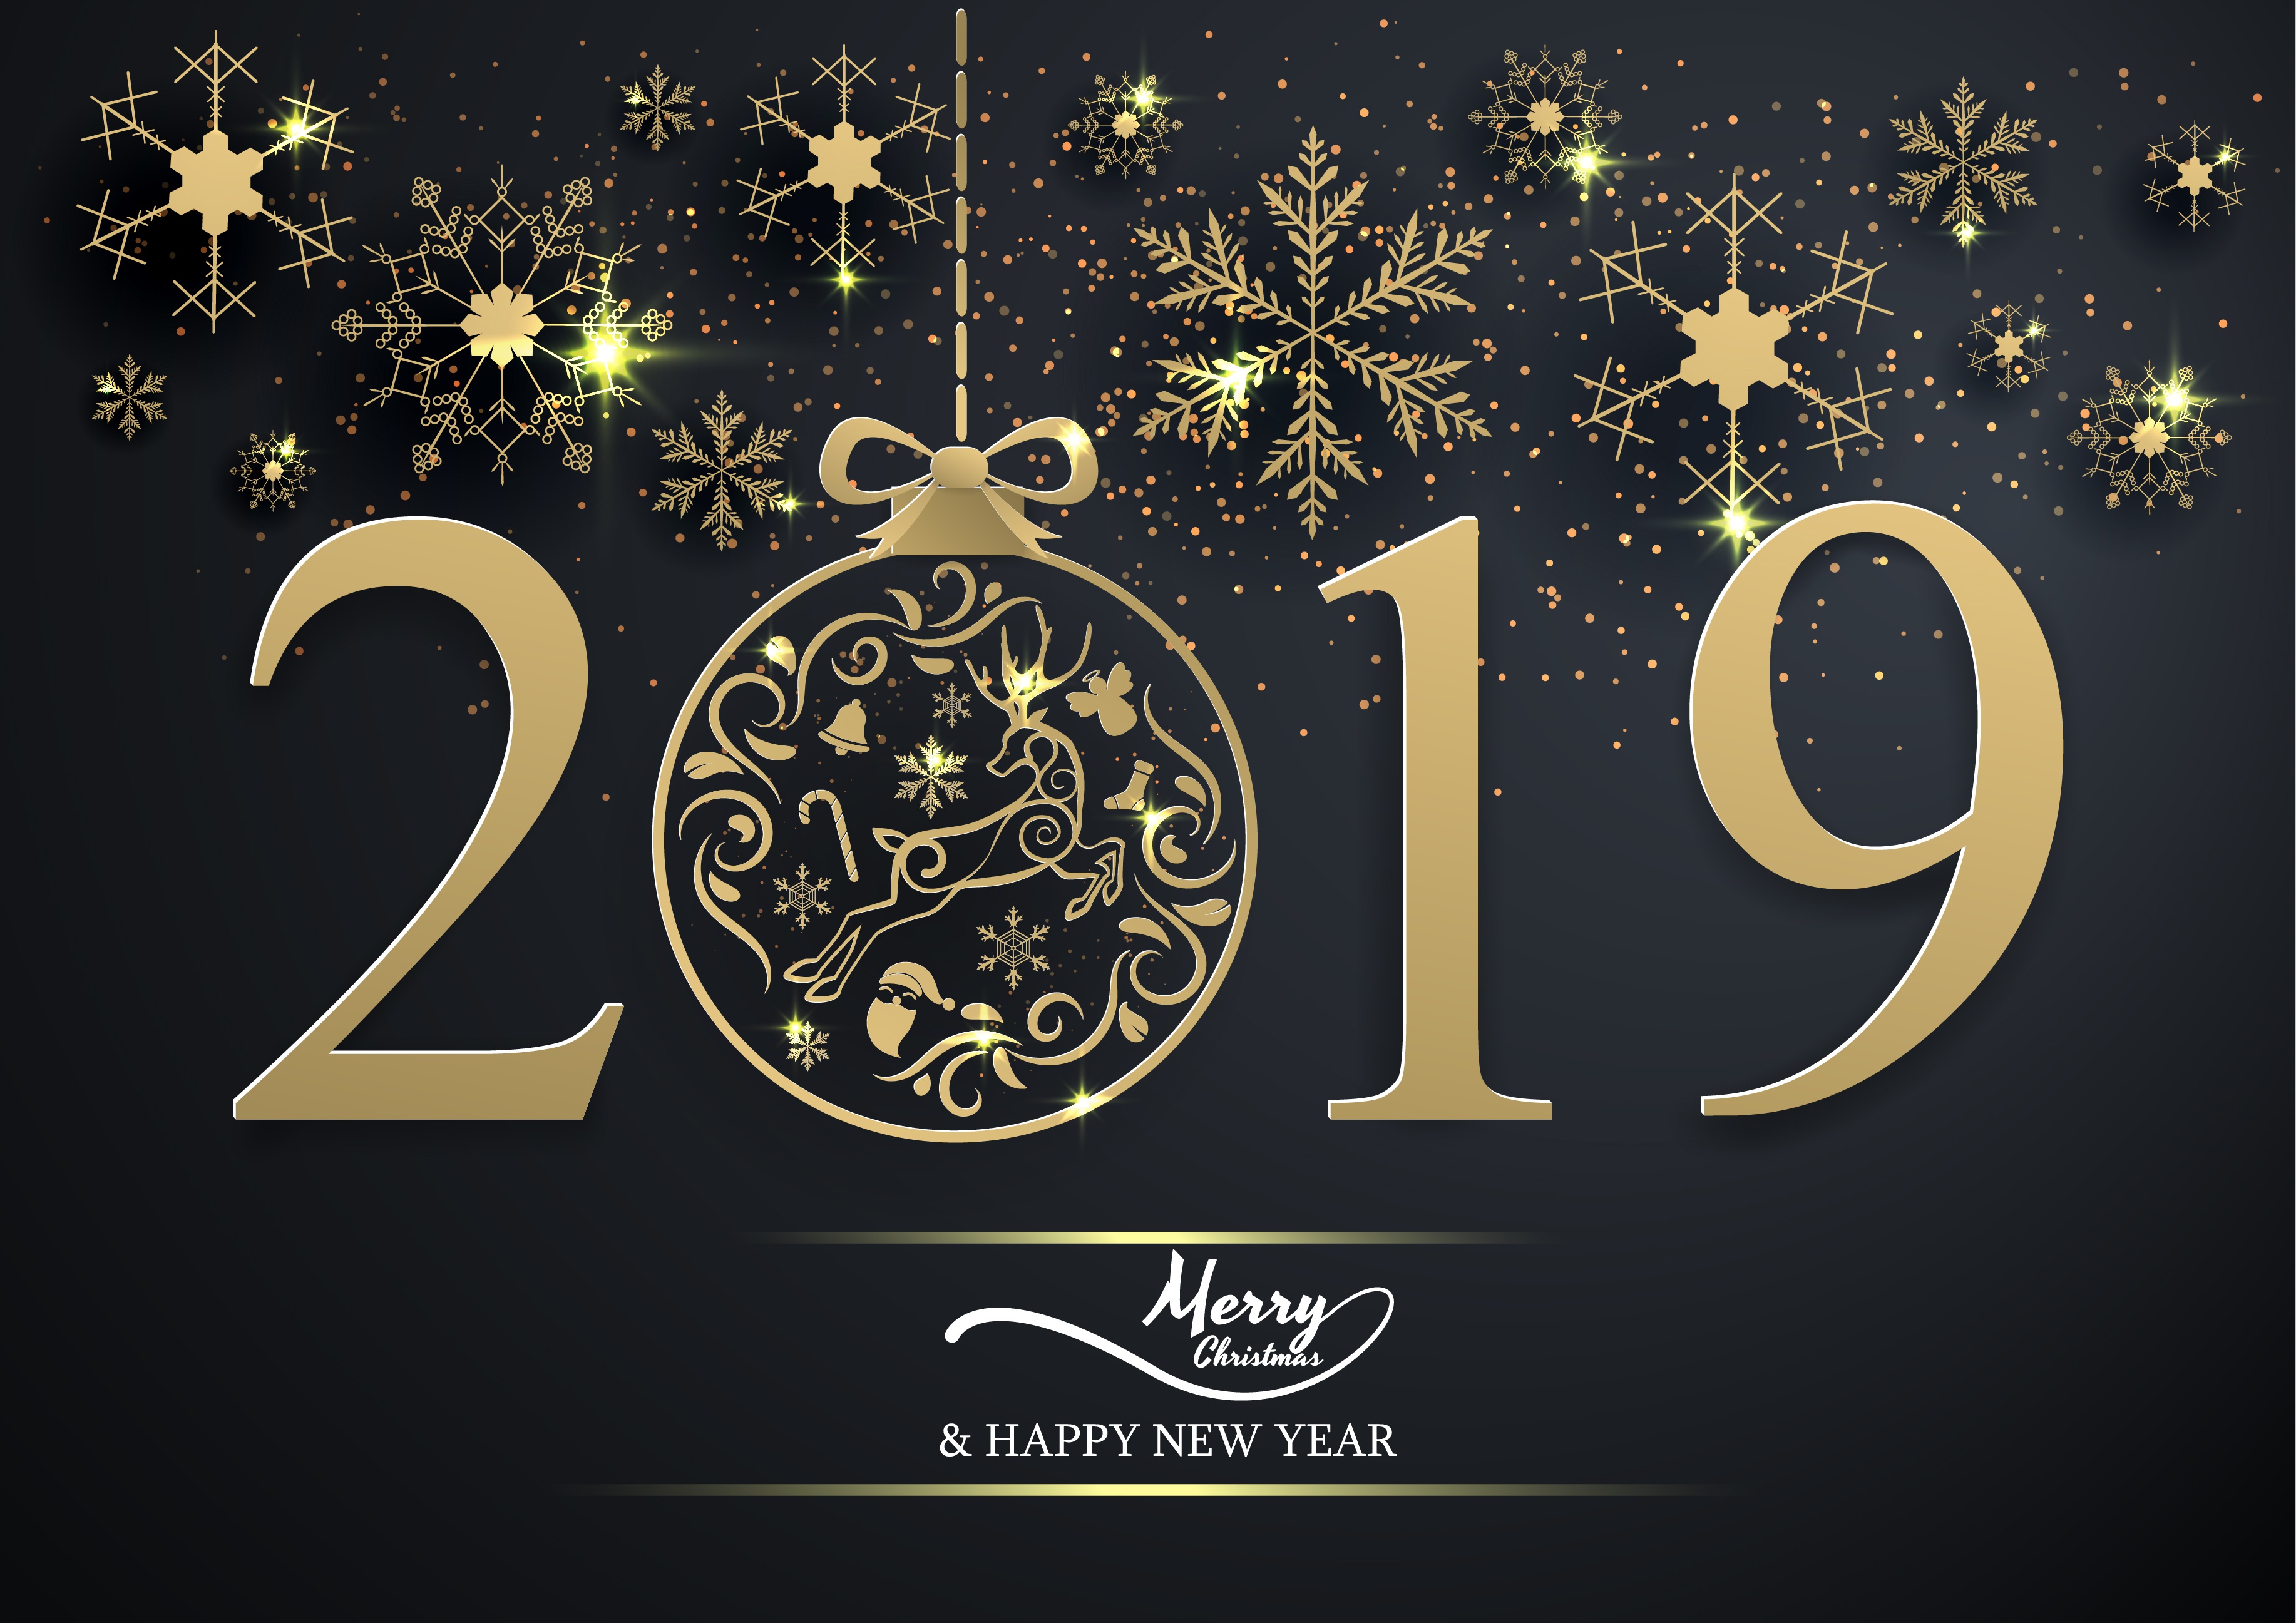 holiday, new year 2019, happy new year, merry christmas